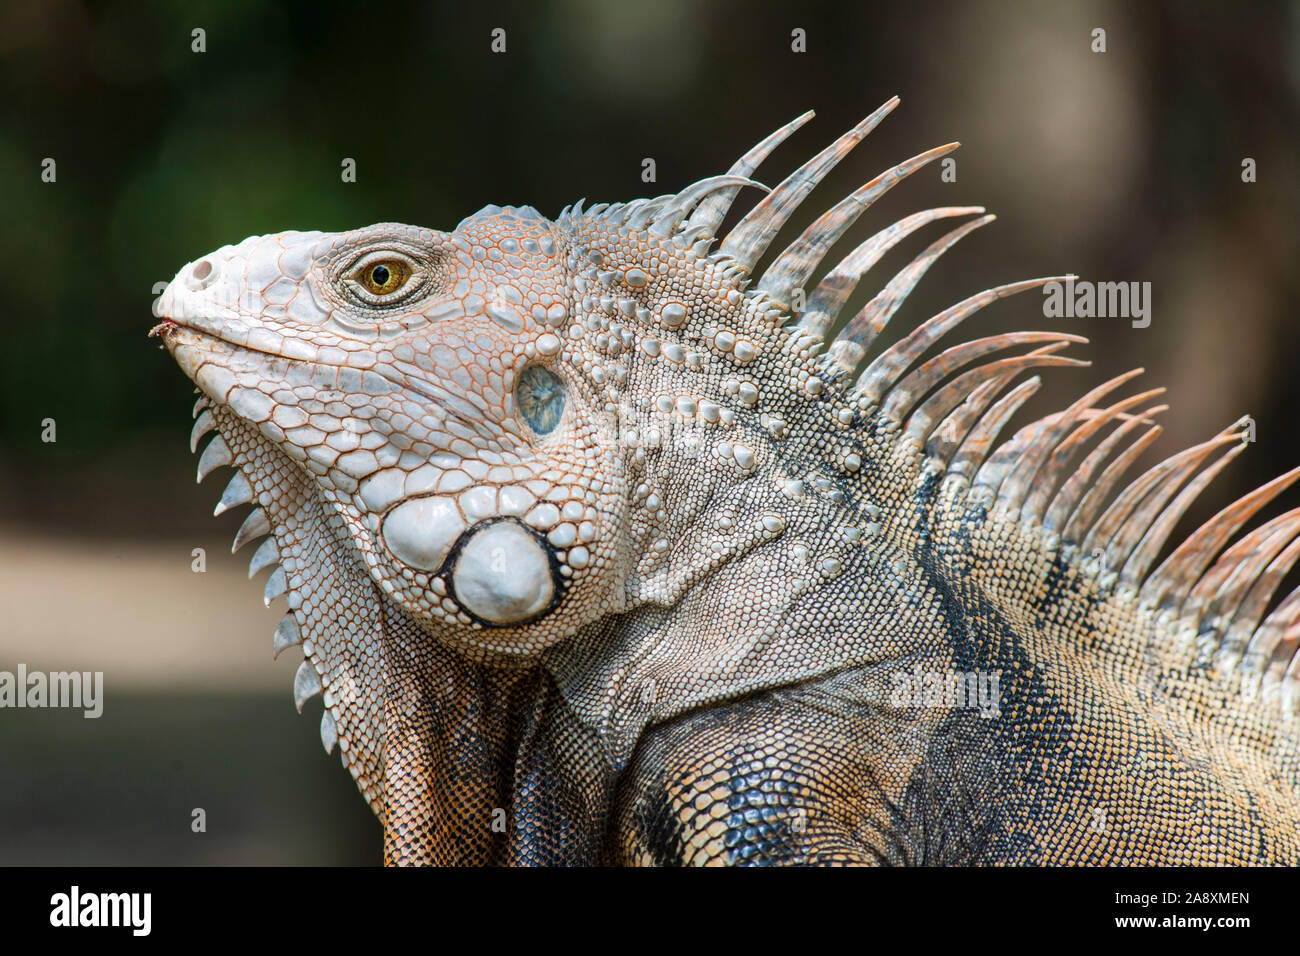 Iguana in the botanical gardens of Medellin, Colombia. Stock Photo